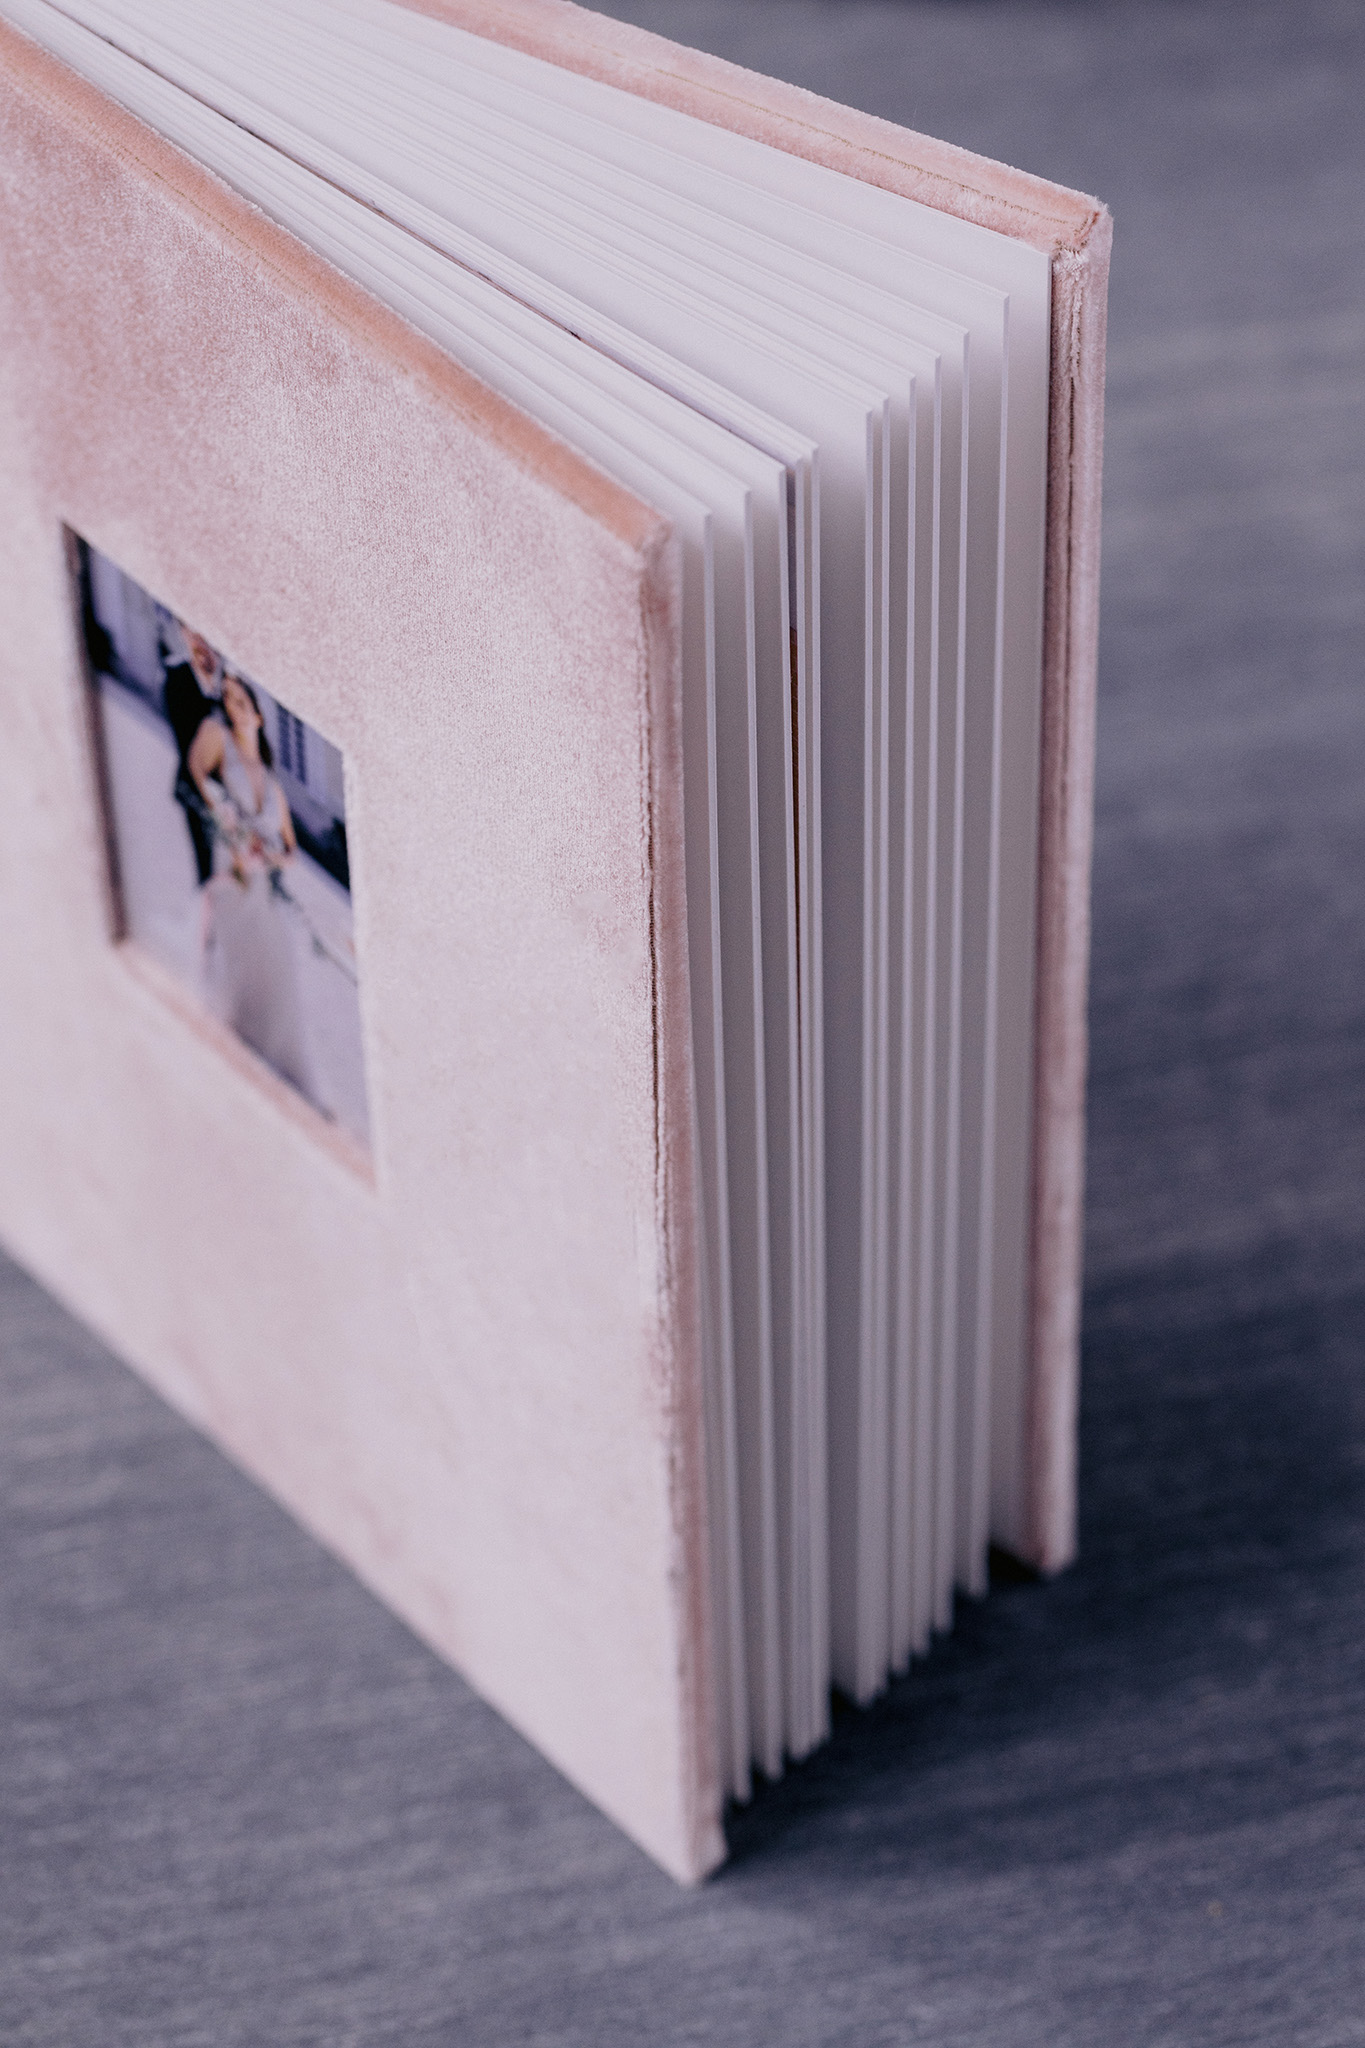 An heirloom wedding album printed on 100% cotton paper imported from Europe.